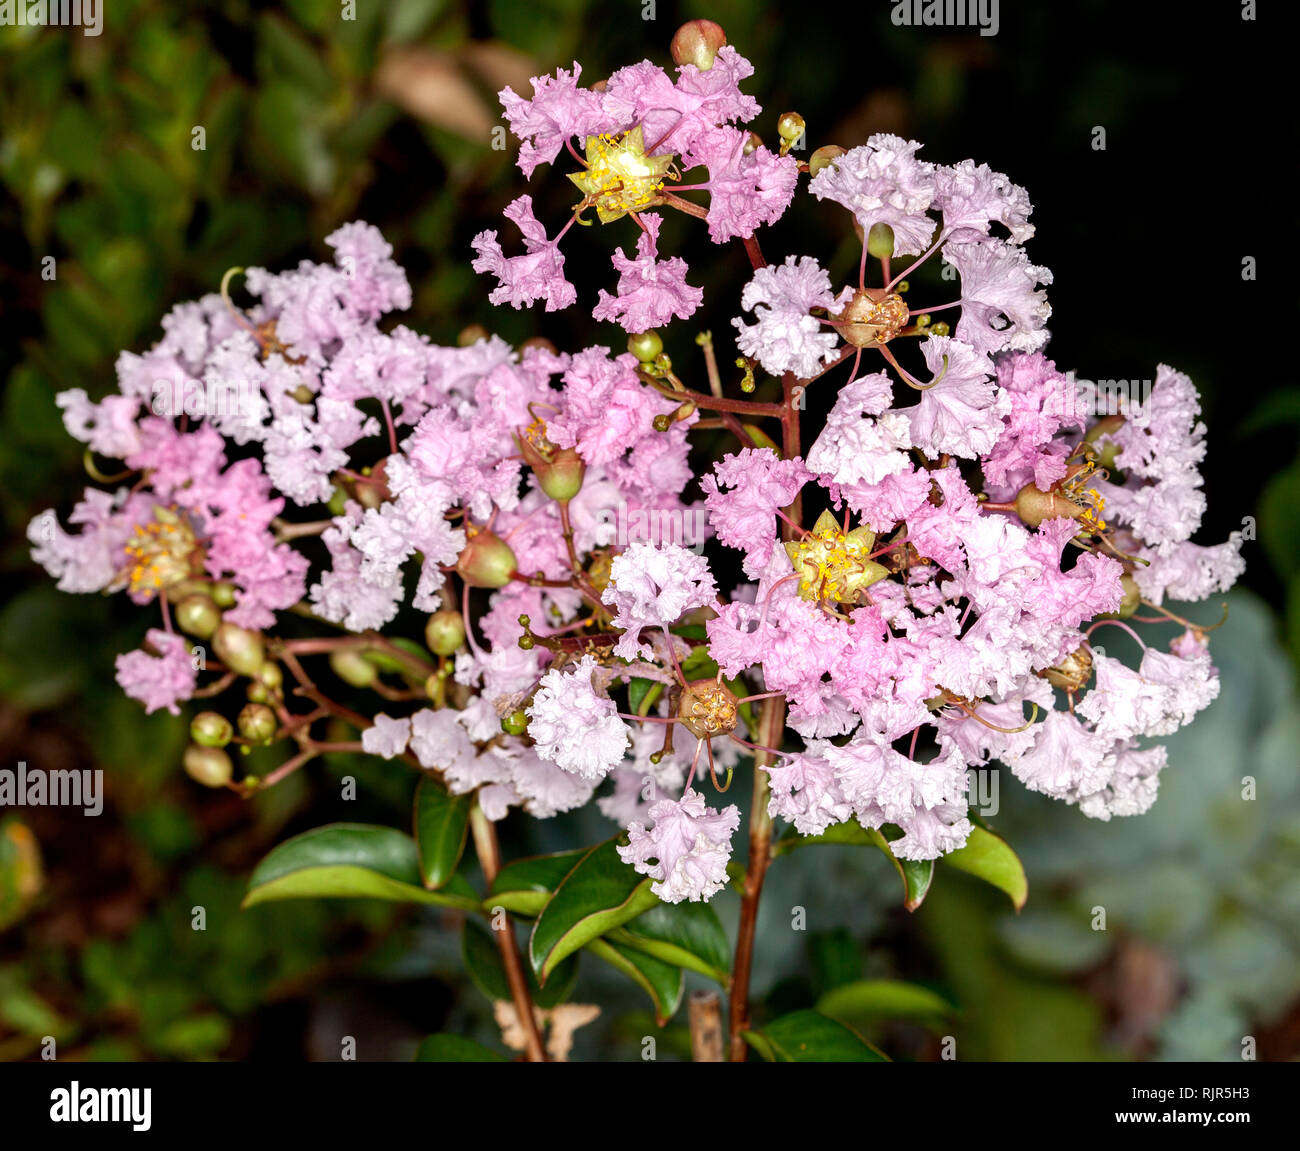 Cluster of delicate pale pink flowers of deciduous shrub / tree Crepe Myrtle, Lagerstroemia indica 'Sordette' against background of green foliage Stock Photo